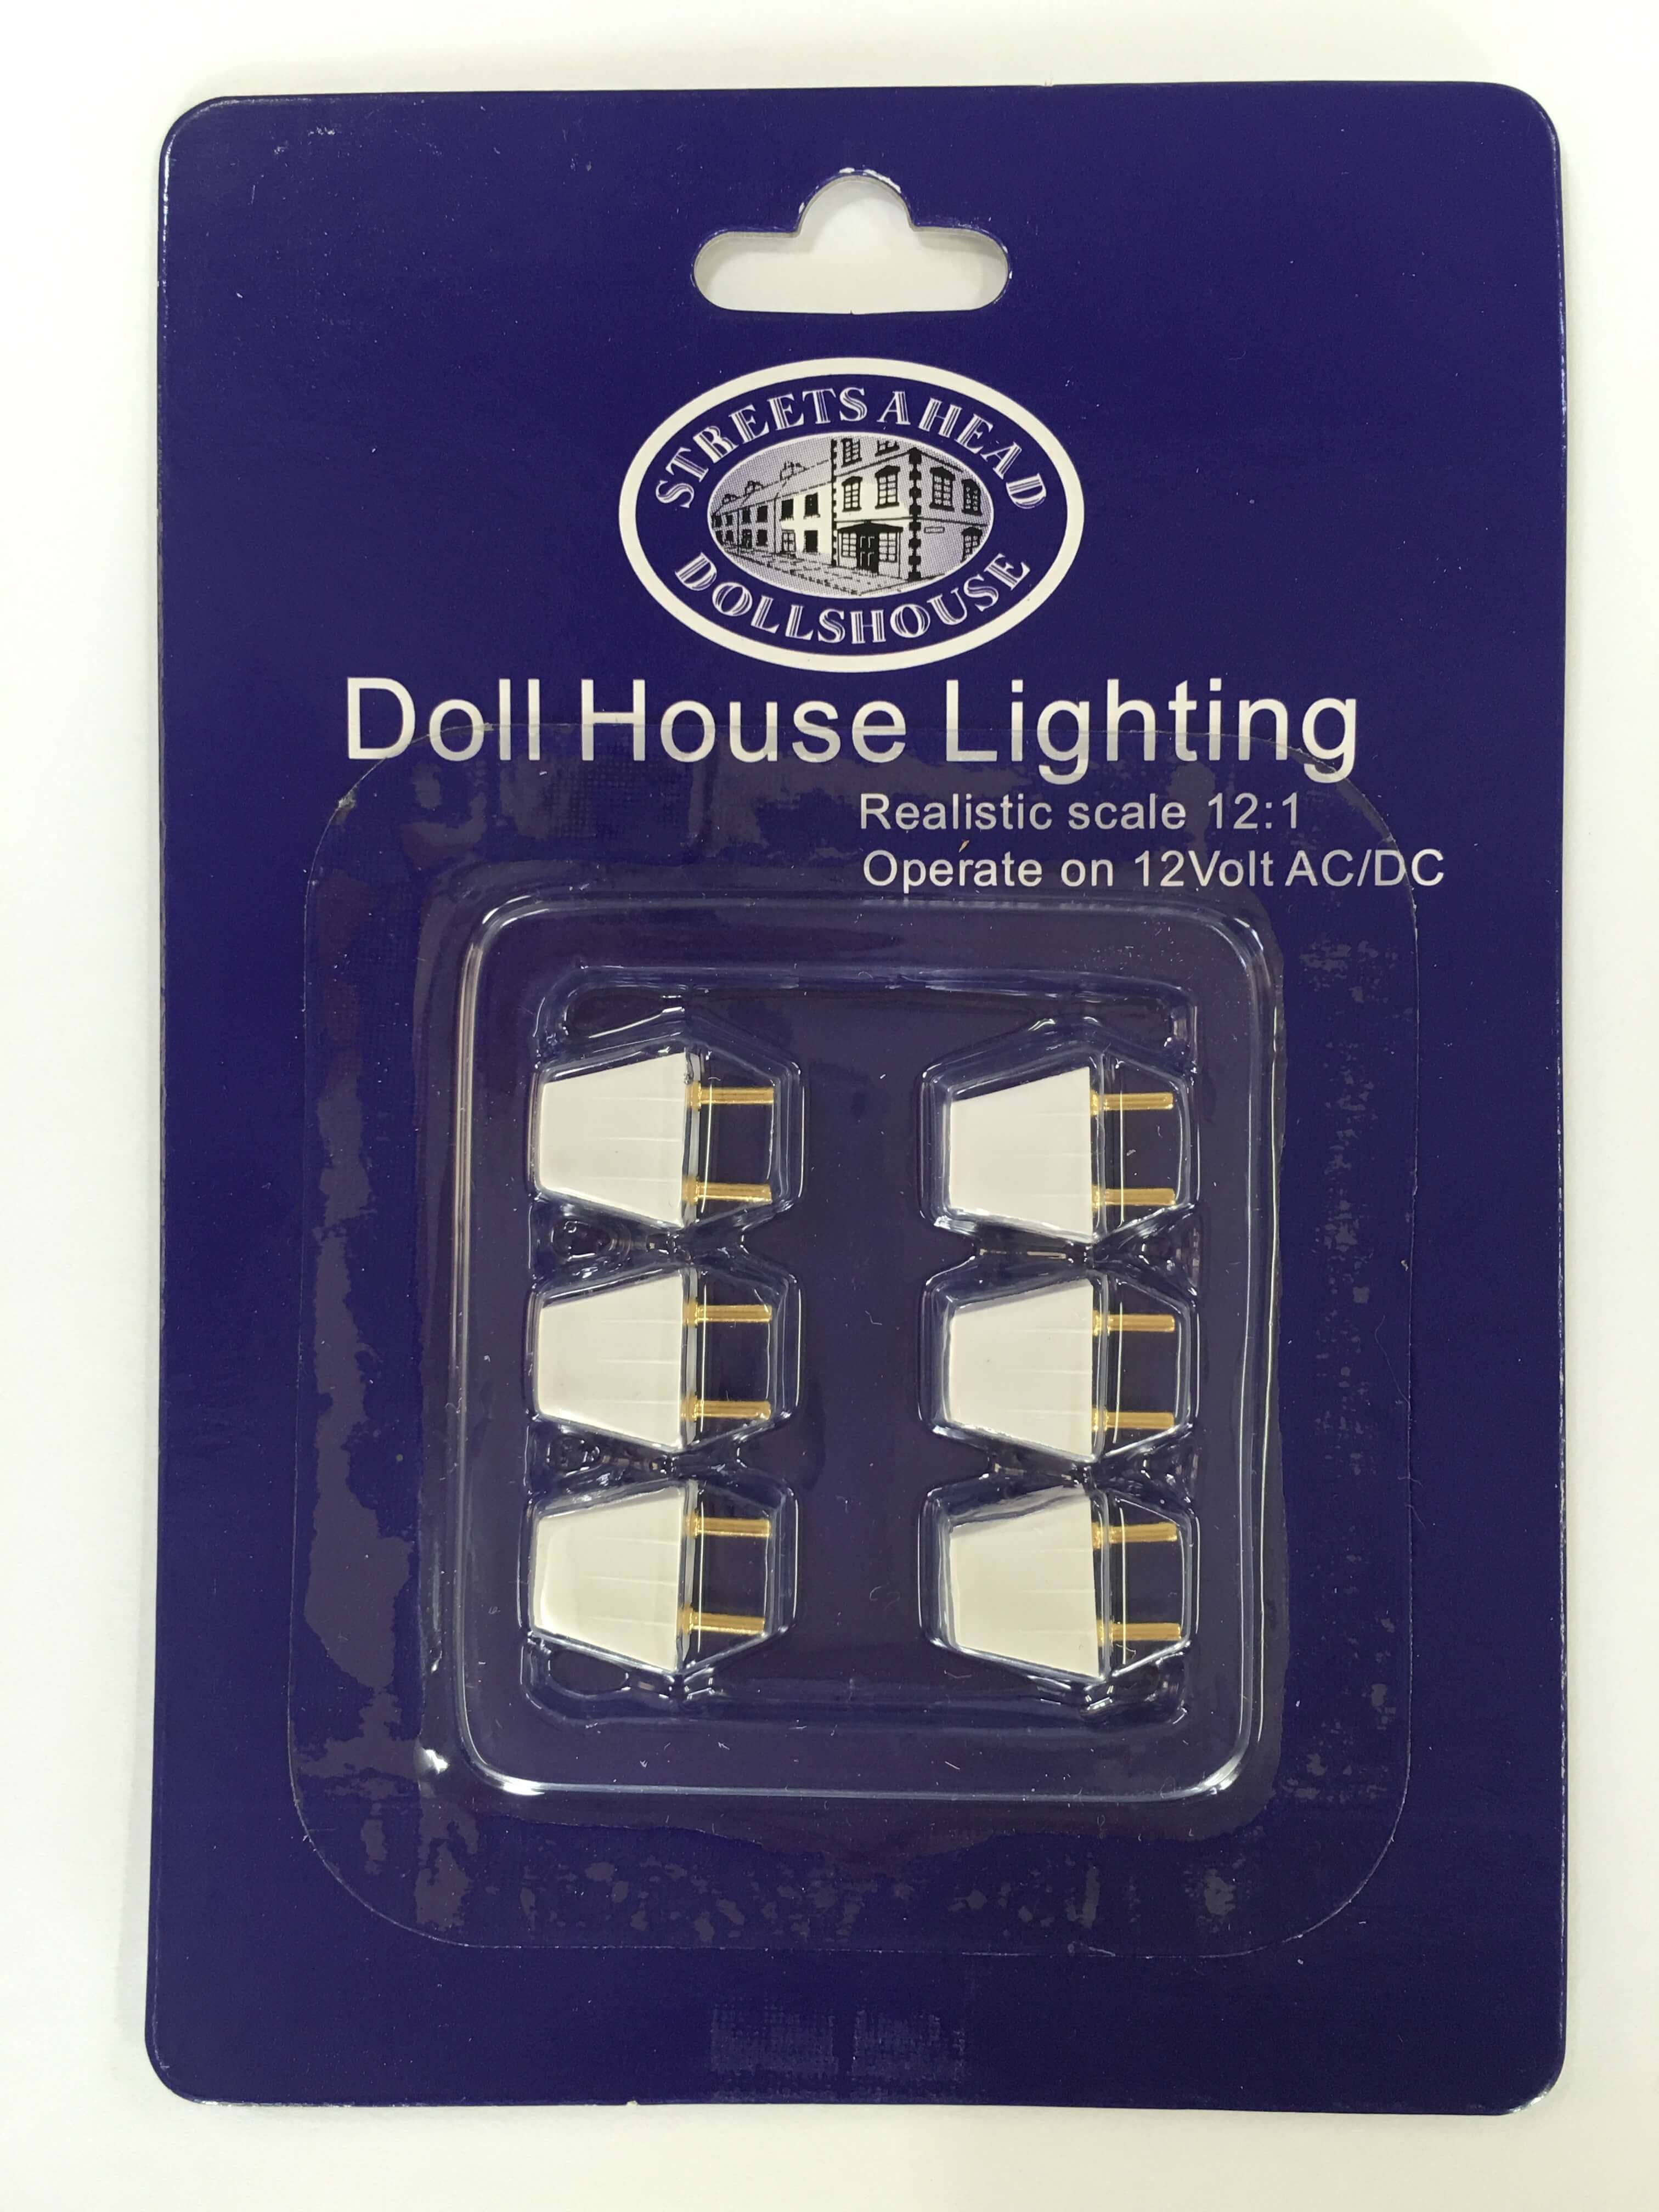 6 x Standard 12V Lighting Plugs for 12th Scale Dolls House